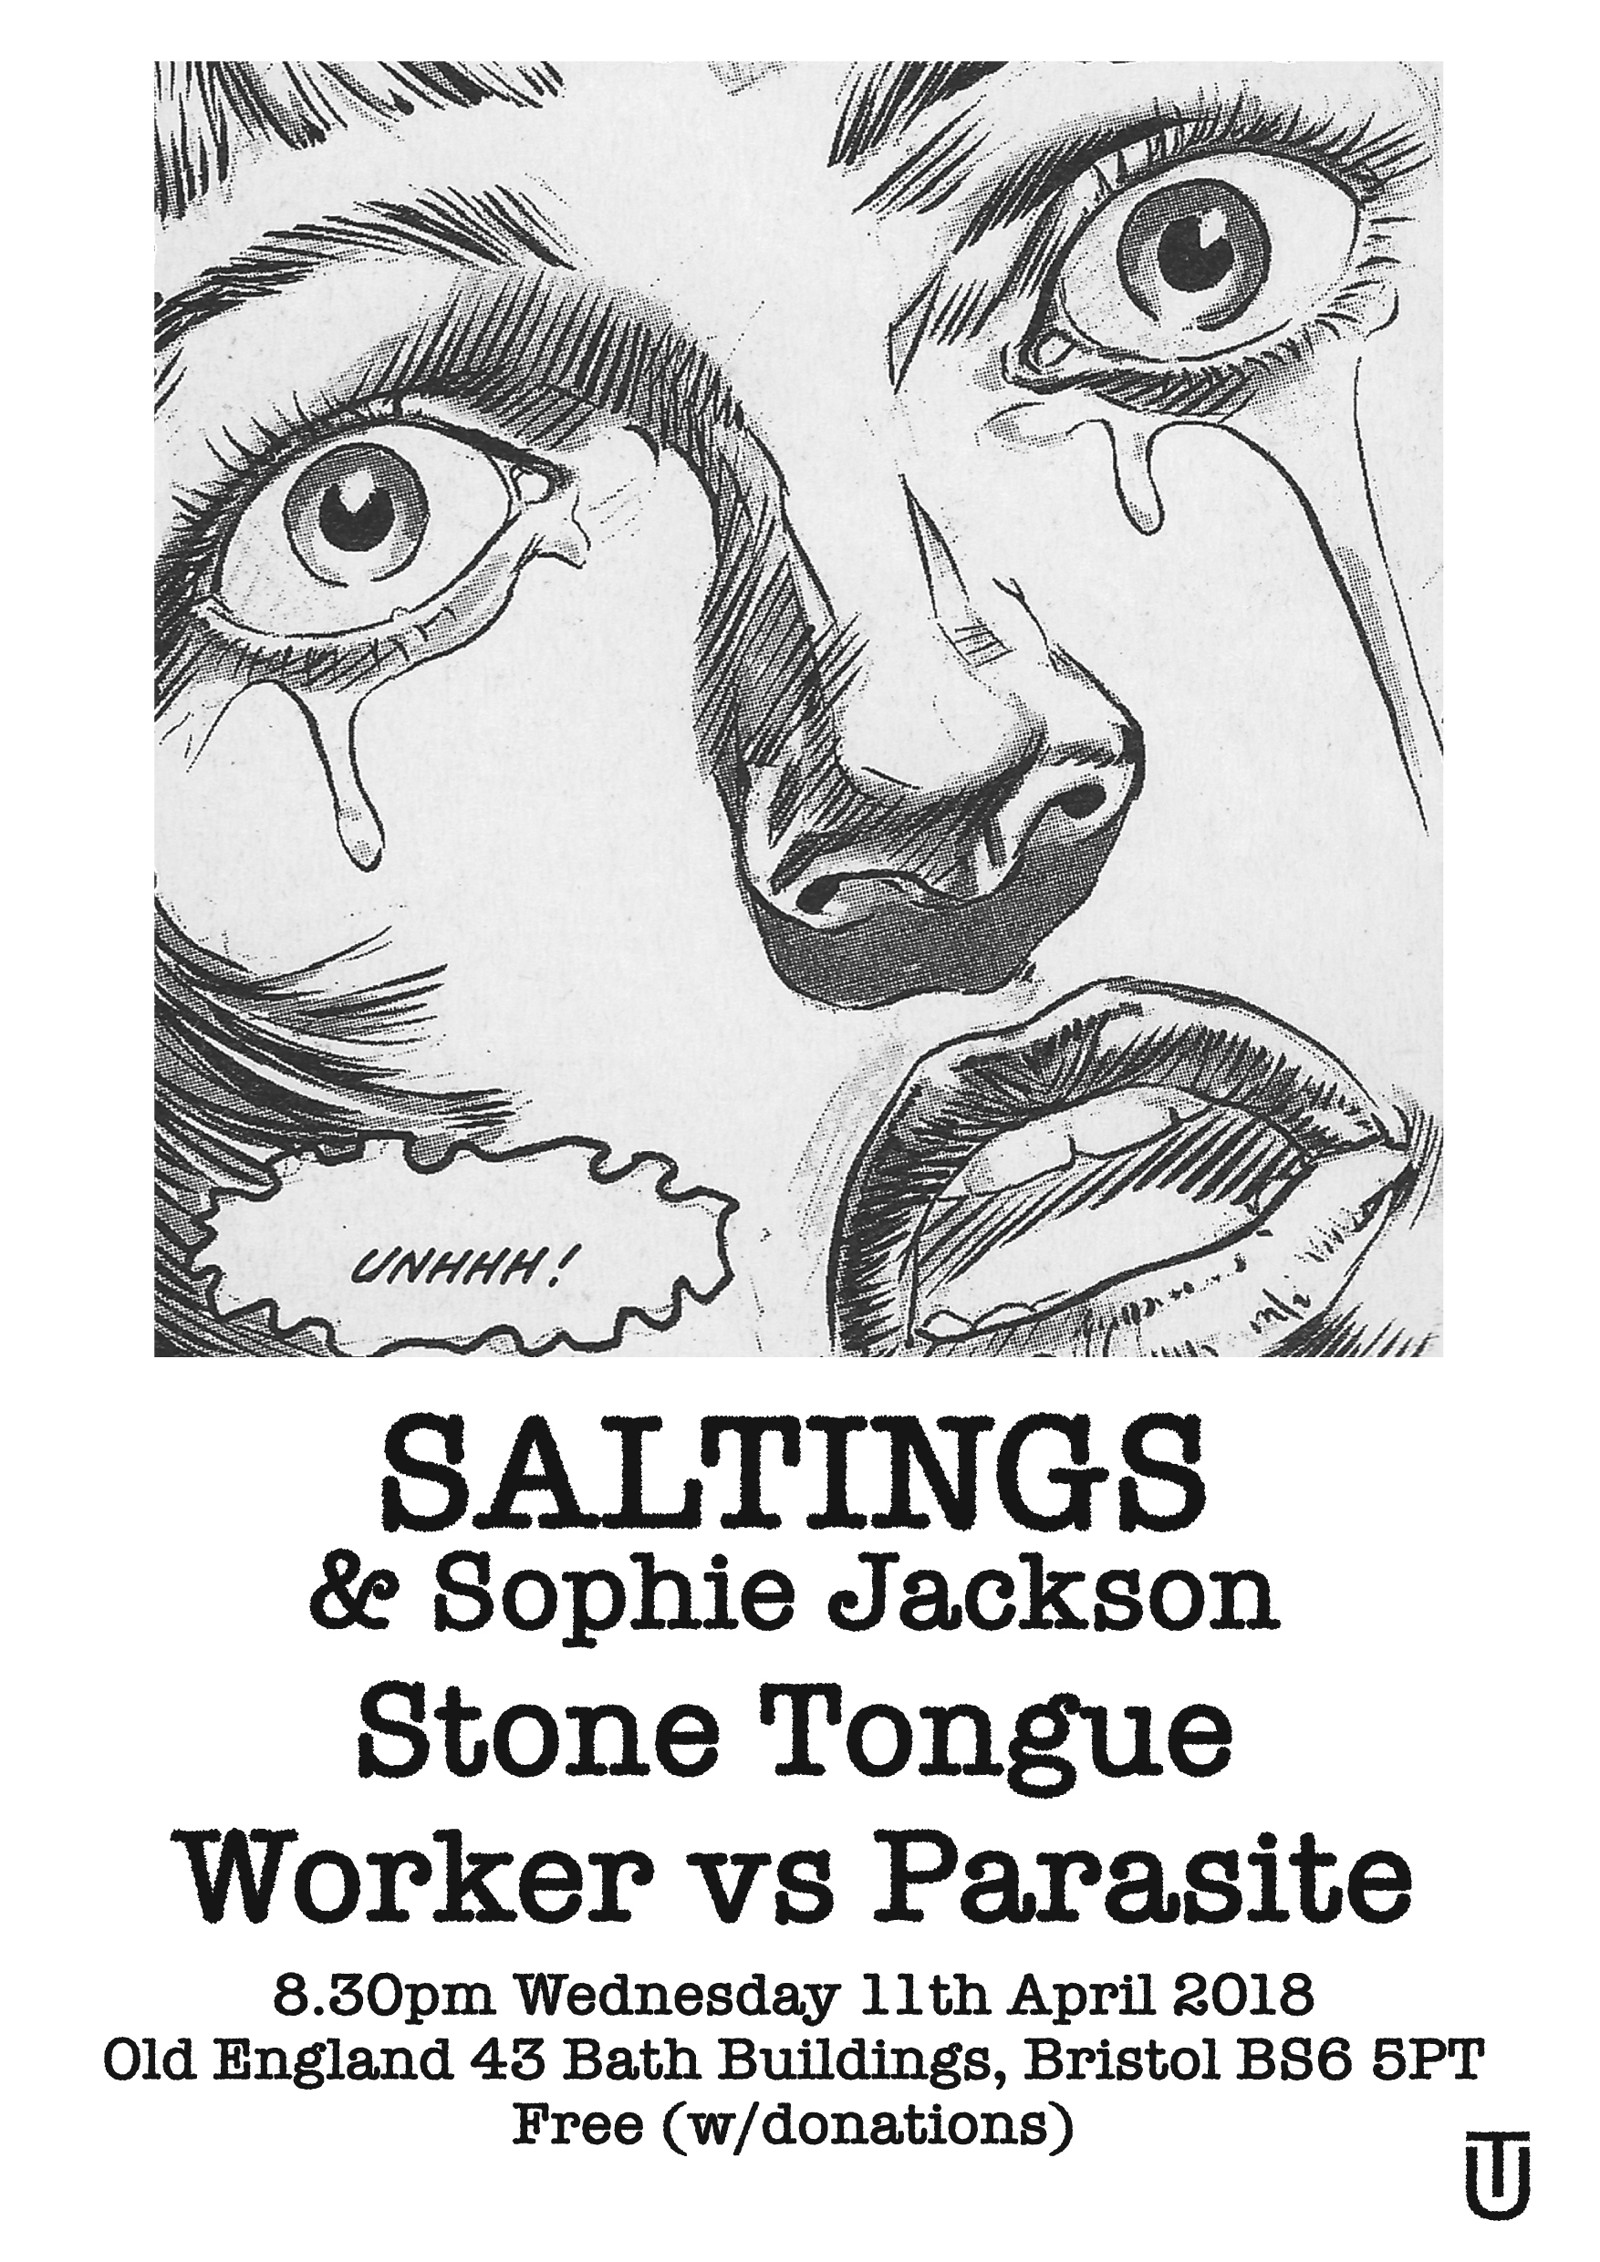 SALTINGS / Stone Tongue / Worker vs Parasite at The Old England Pub